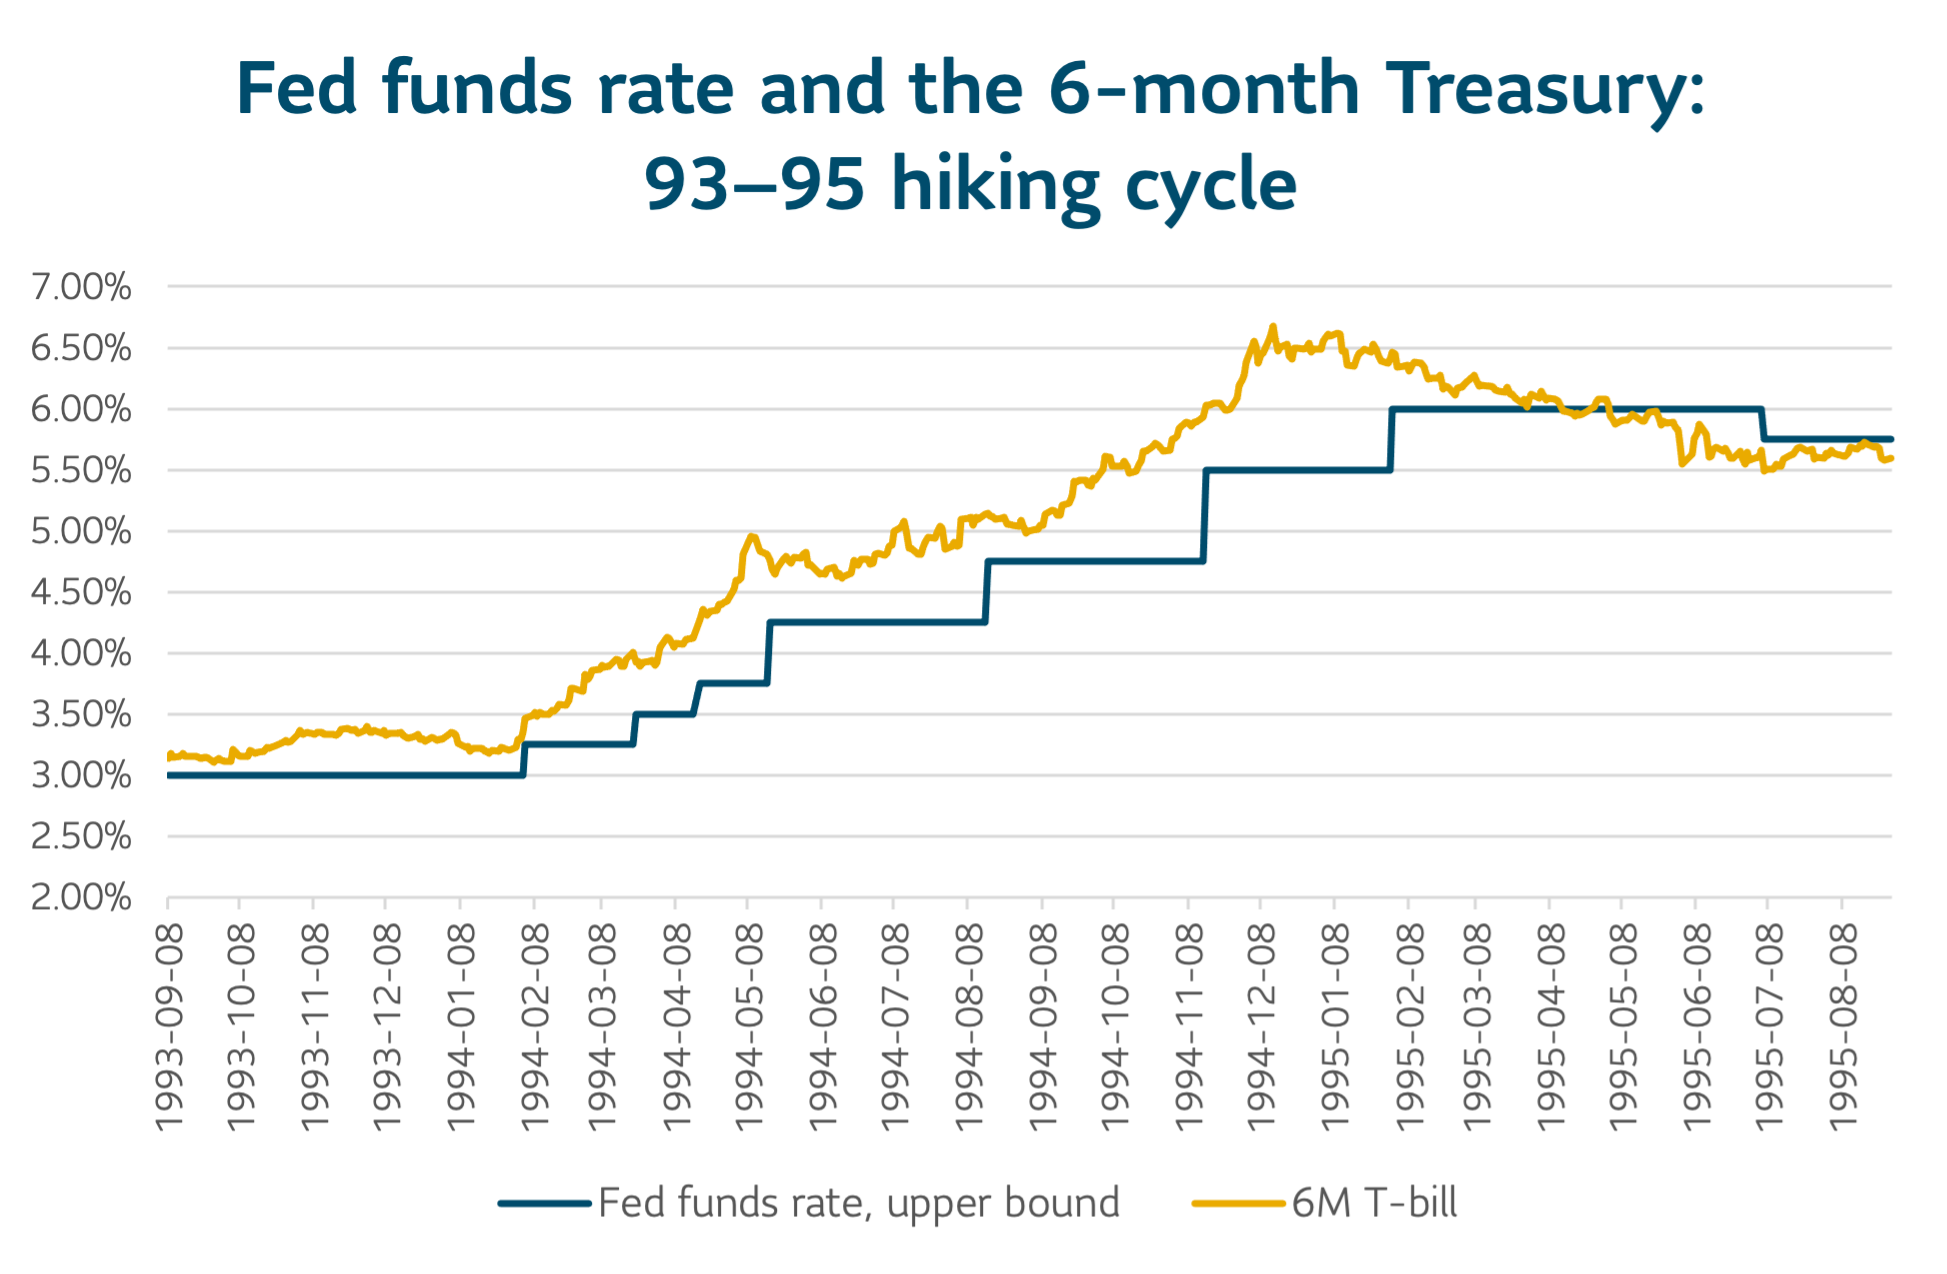 Fed funds rate and the 6-month Treasury: 93-95 hiking cycle